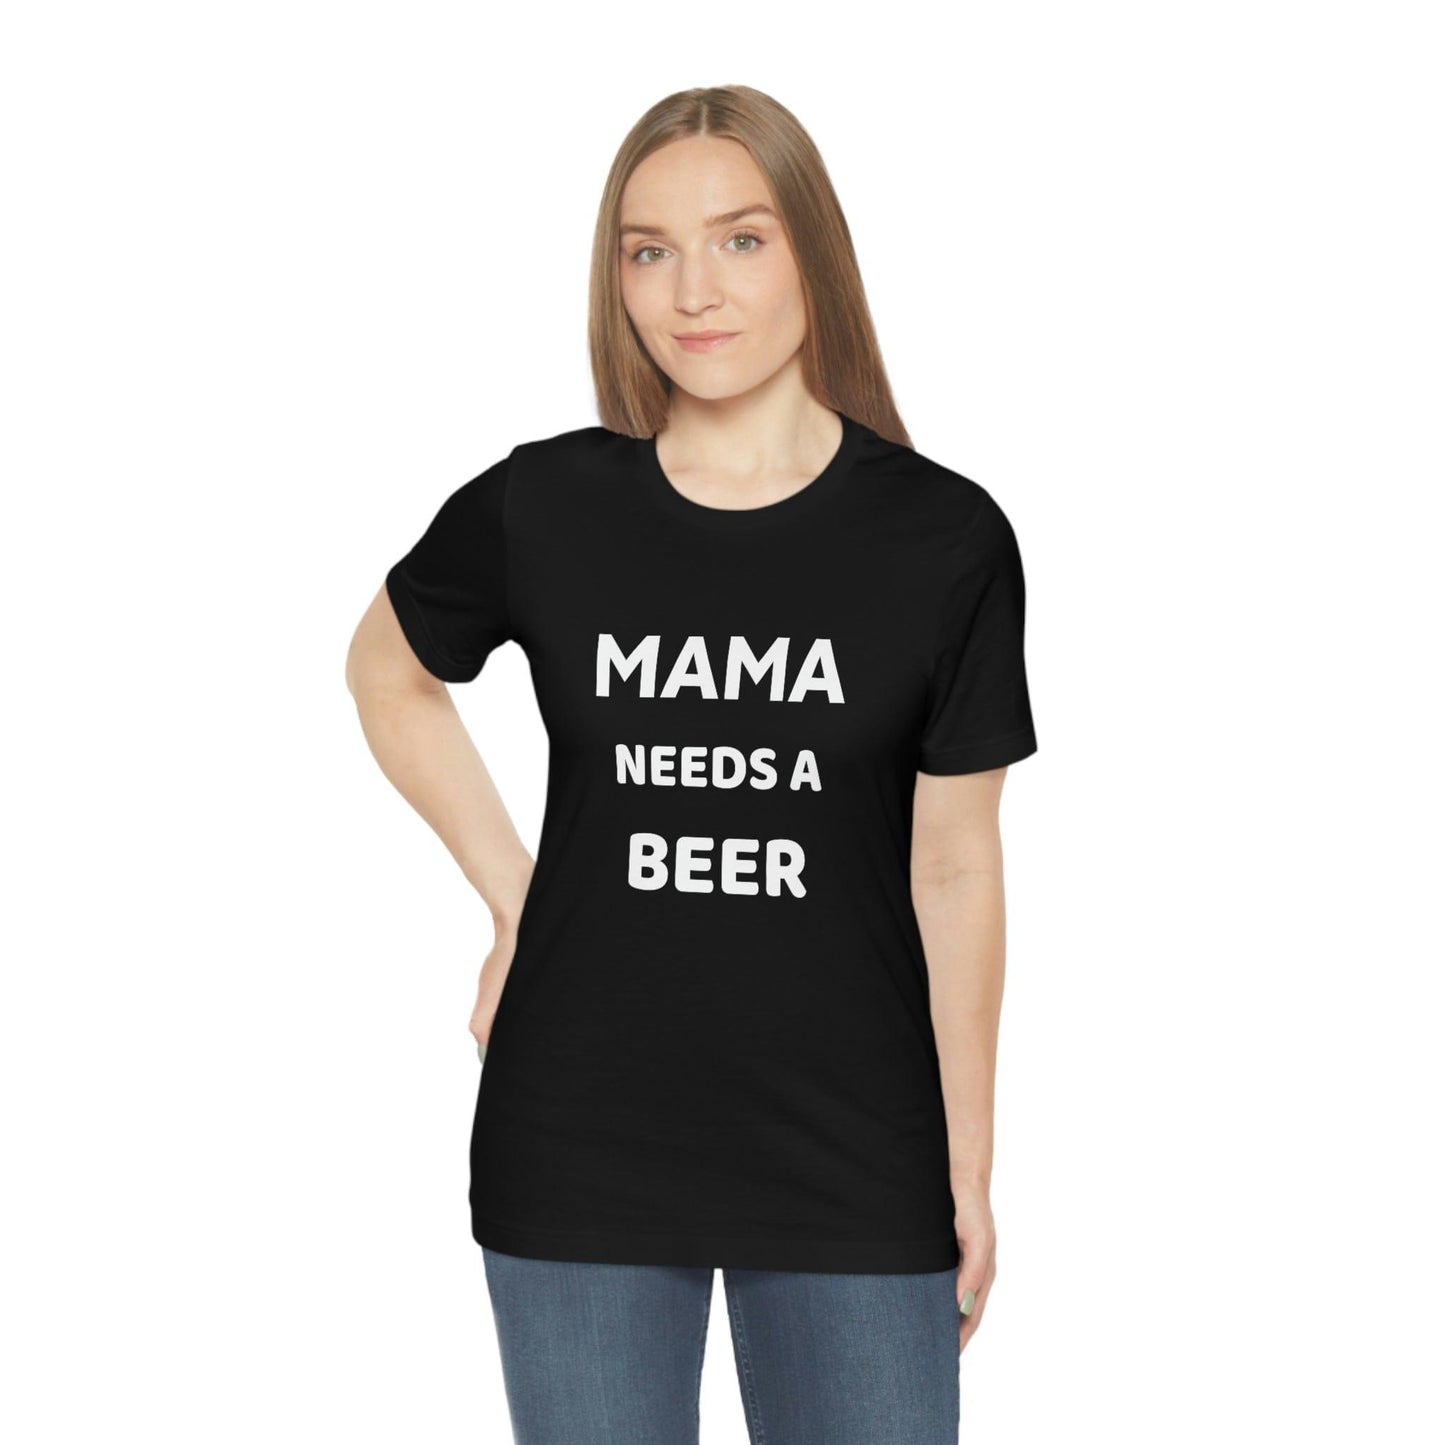 Mama needs a beer - gift for beer lover - Funny beer shirt - Funny shirt